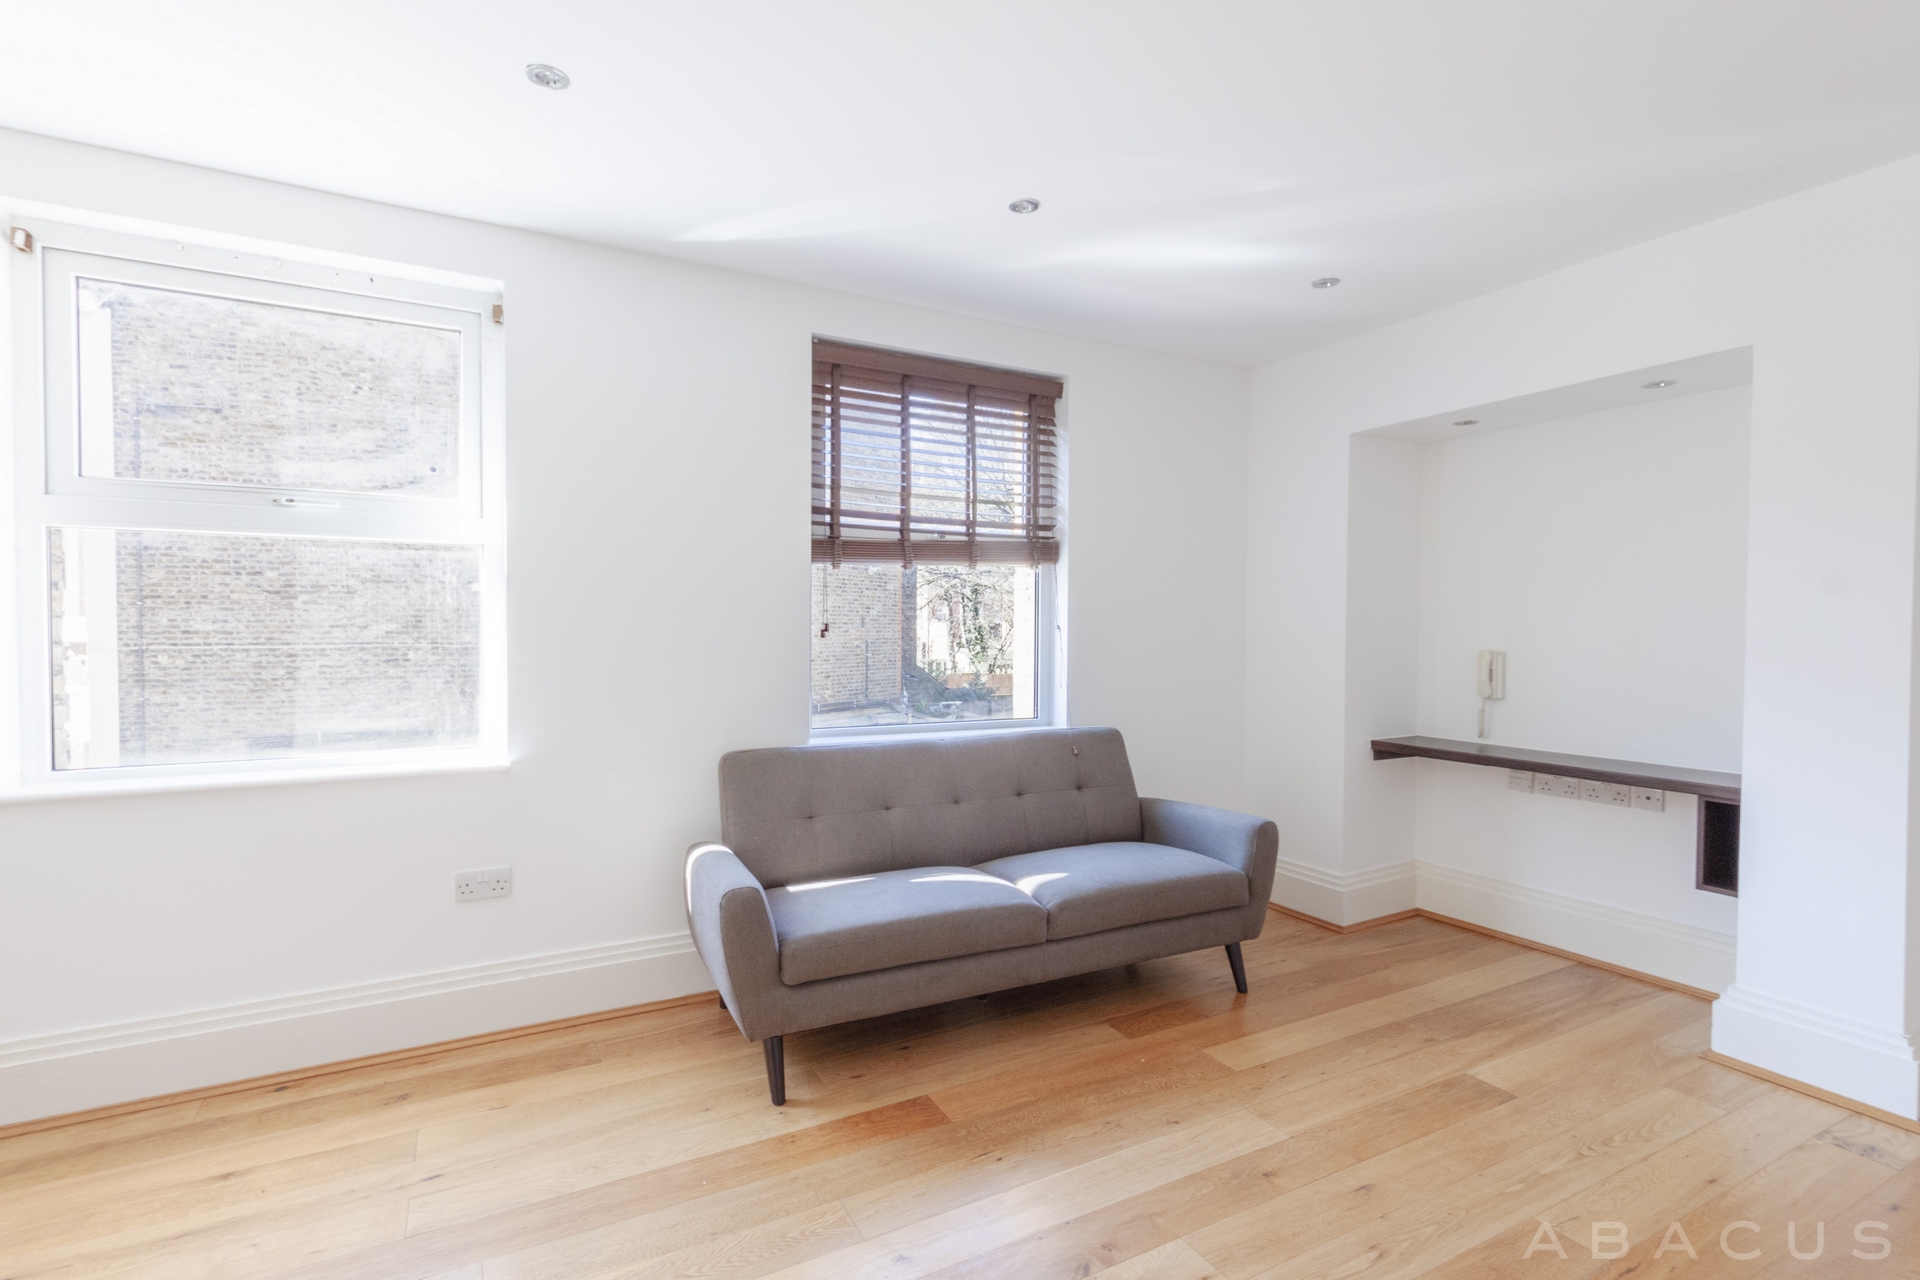 1 Bedroom Flat to rent in West Hampstead, London, NW6